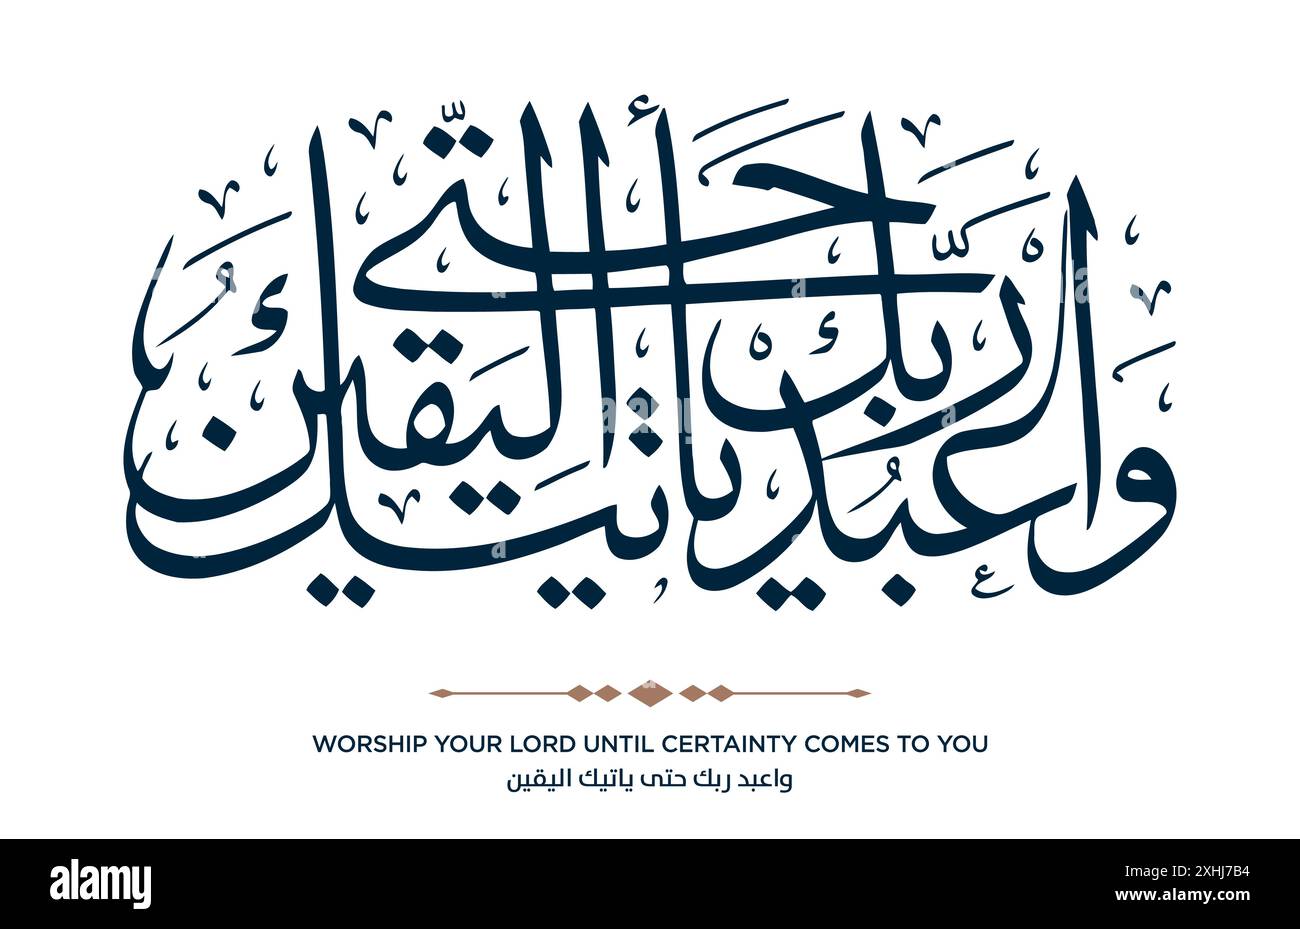 Verse from the Quran Translation WORSHIP YOUR LORD UNTIL CERTAINTY COMES TO YOU - واعبد ربك حتى ياتيك اليقين Stock Vector